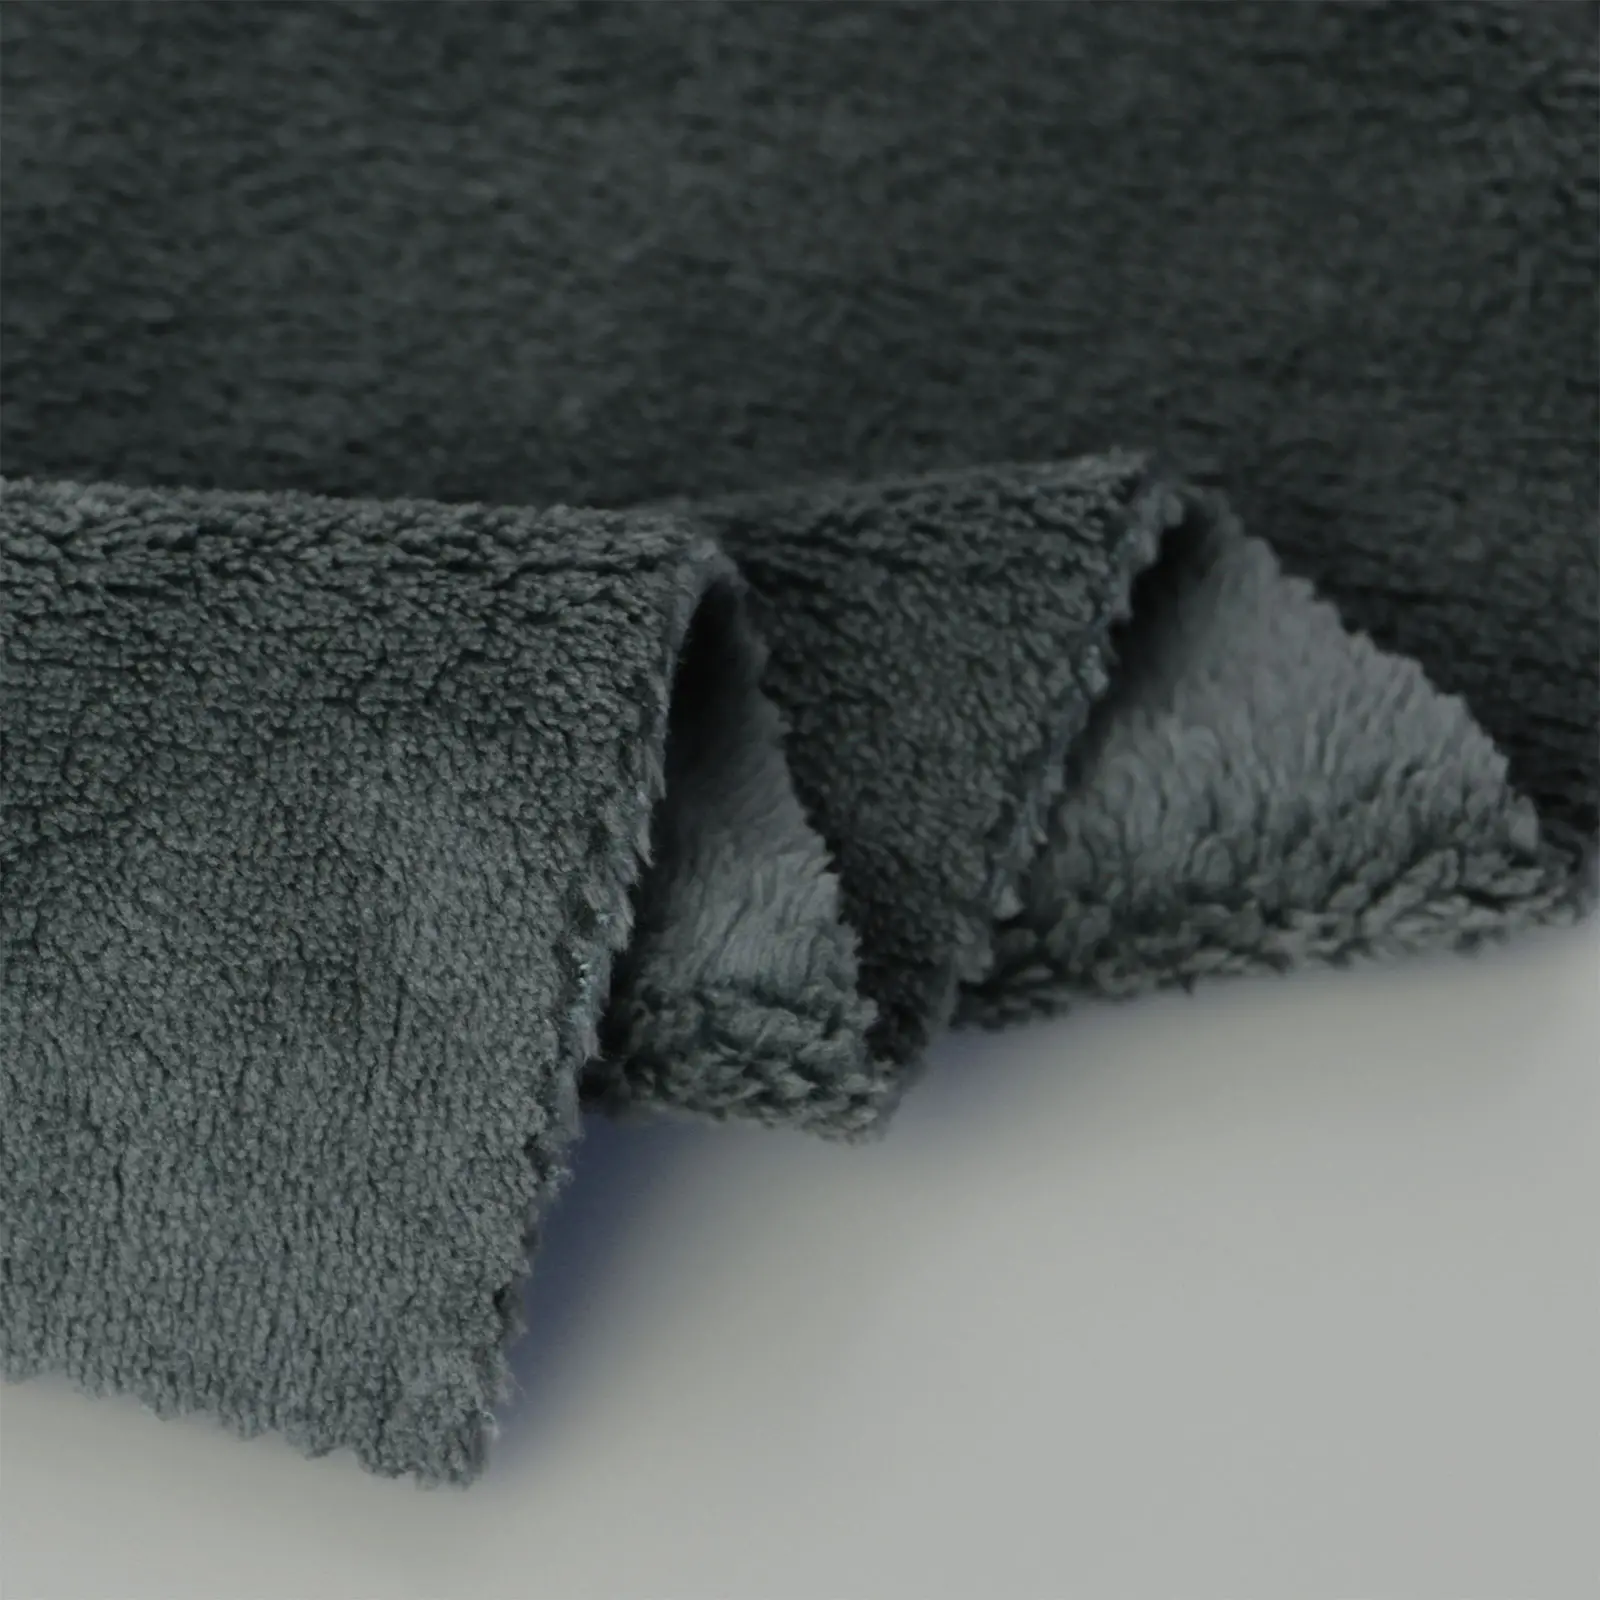 Antistatic 2 Side Brushed Solid Luxurious Smooth Soft Flannel Fabric -  China 100% Polyester and Soft and Plush price